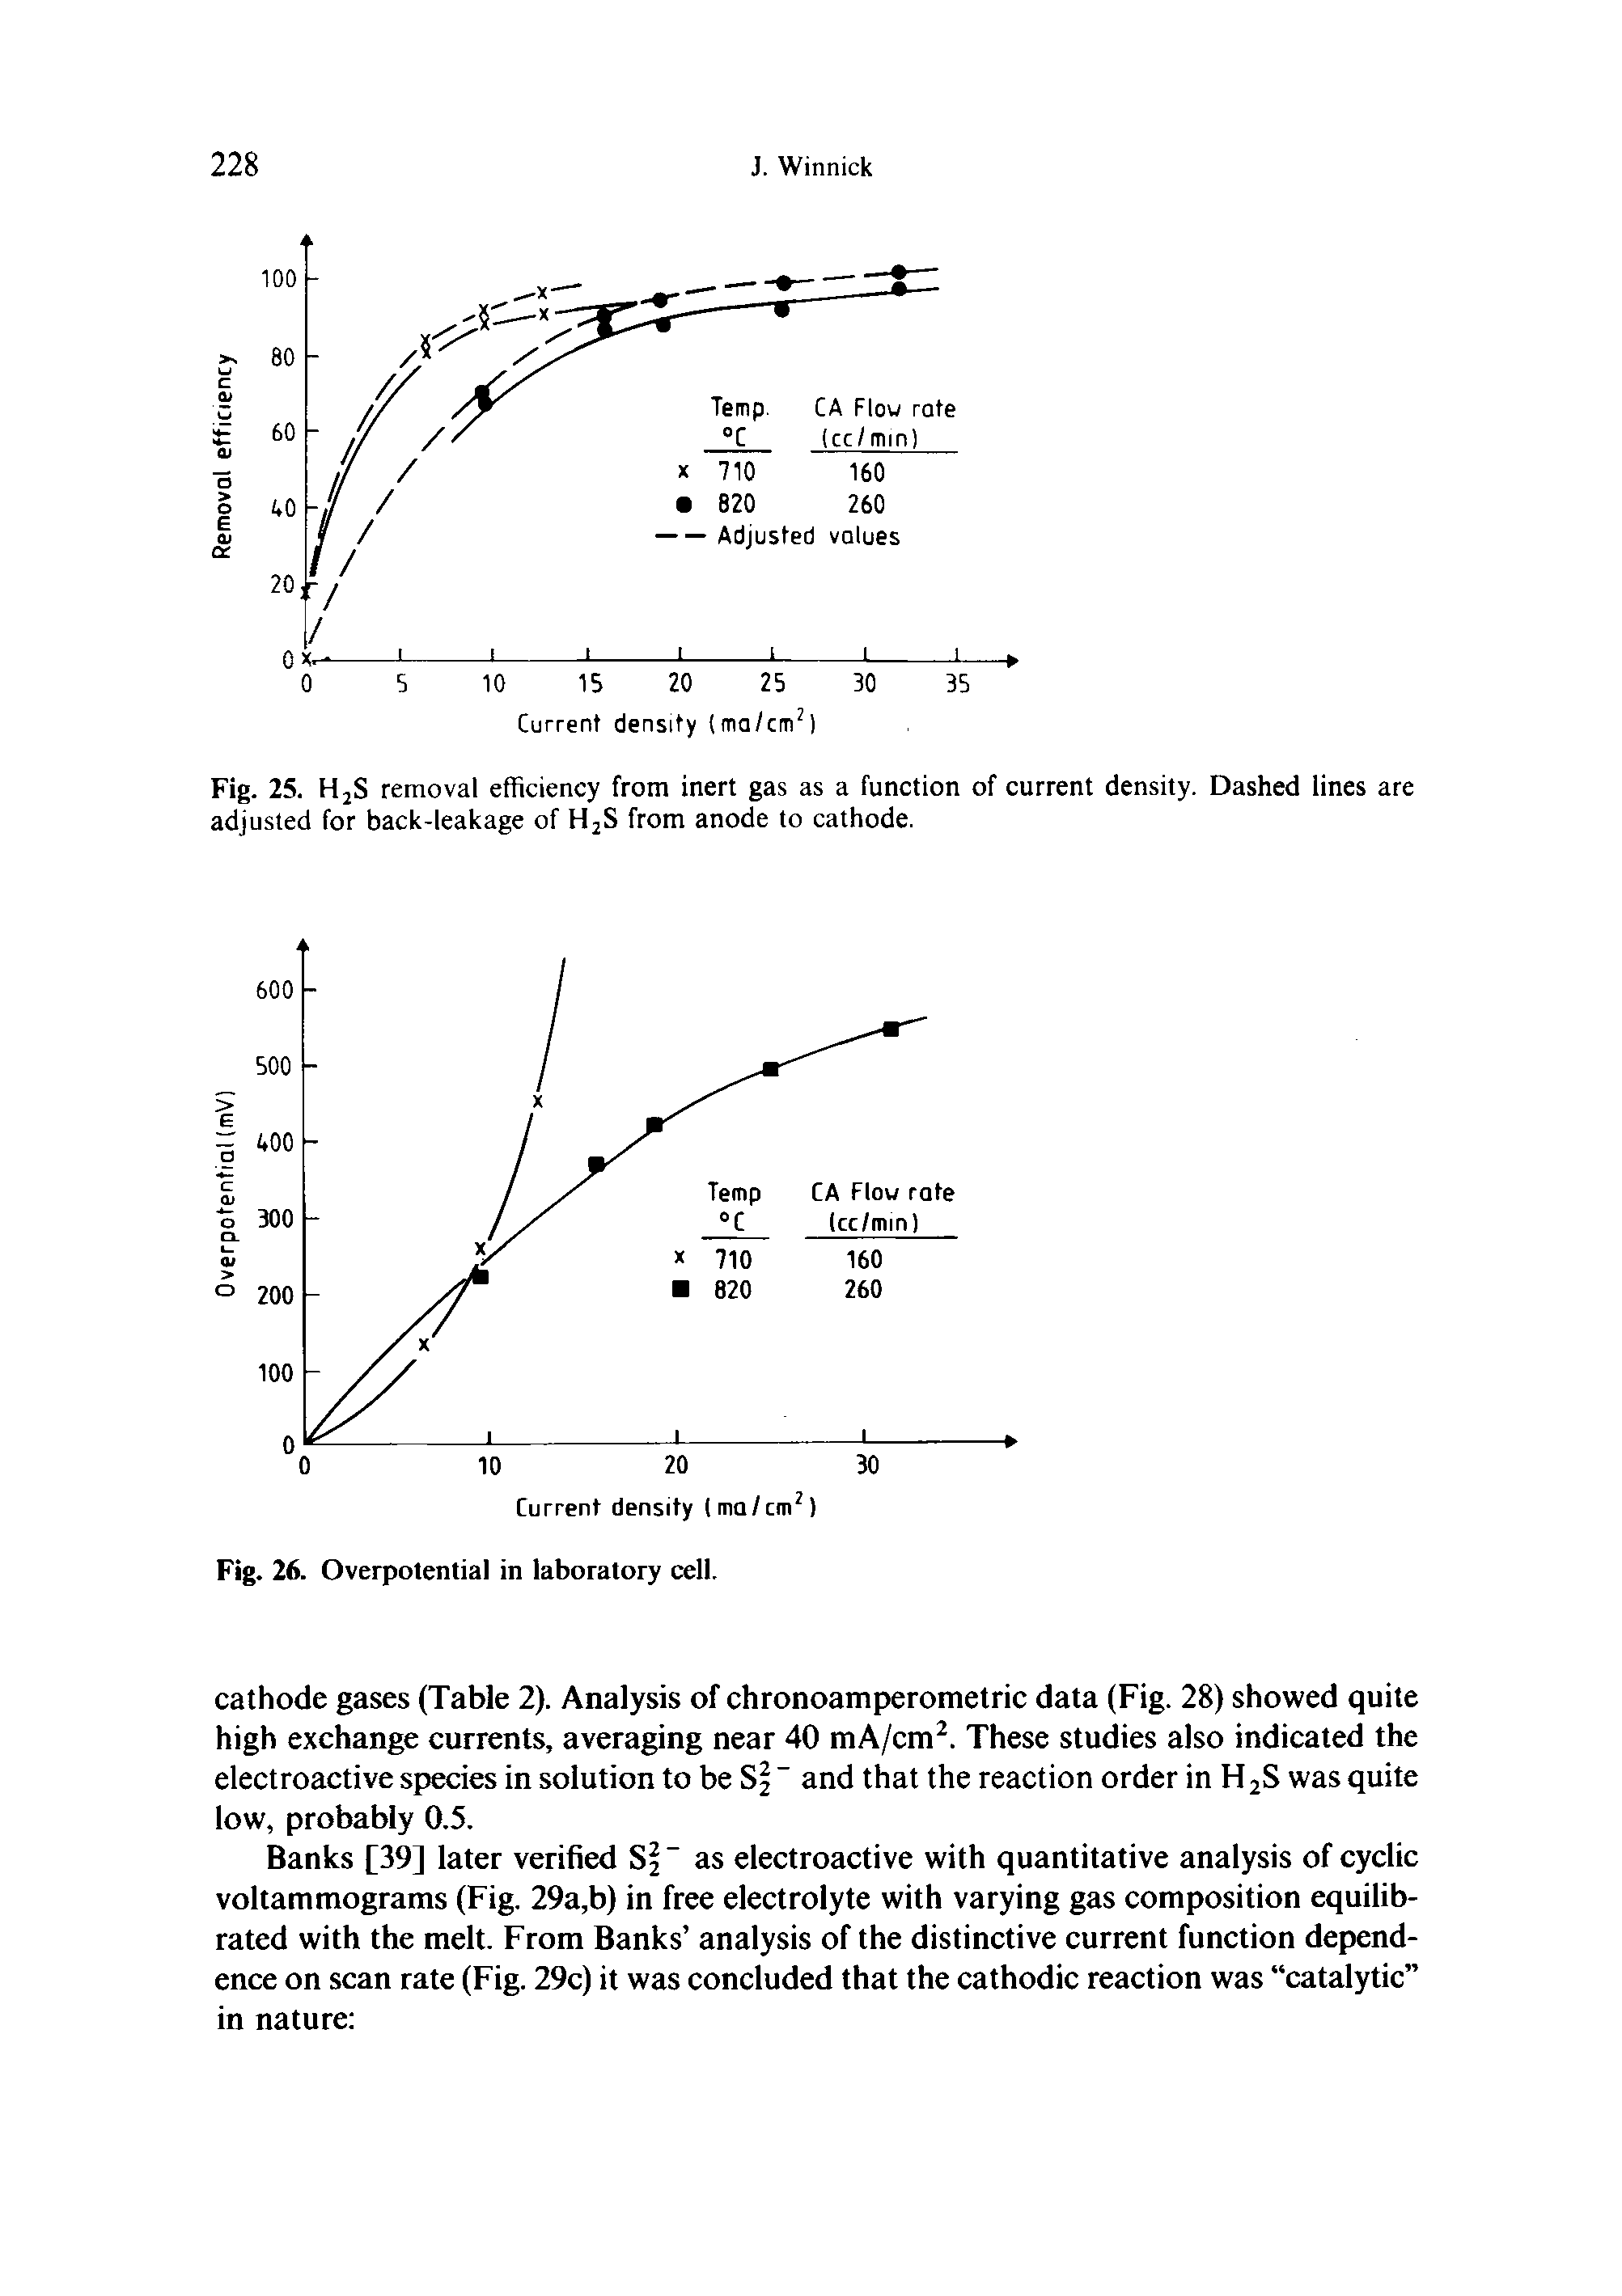 Fig. 25. H2S removal efficiency from inert gas as a function of current density. Dashed lines are adjusted for back-leakage of H2S from anode to cathode.